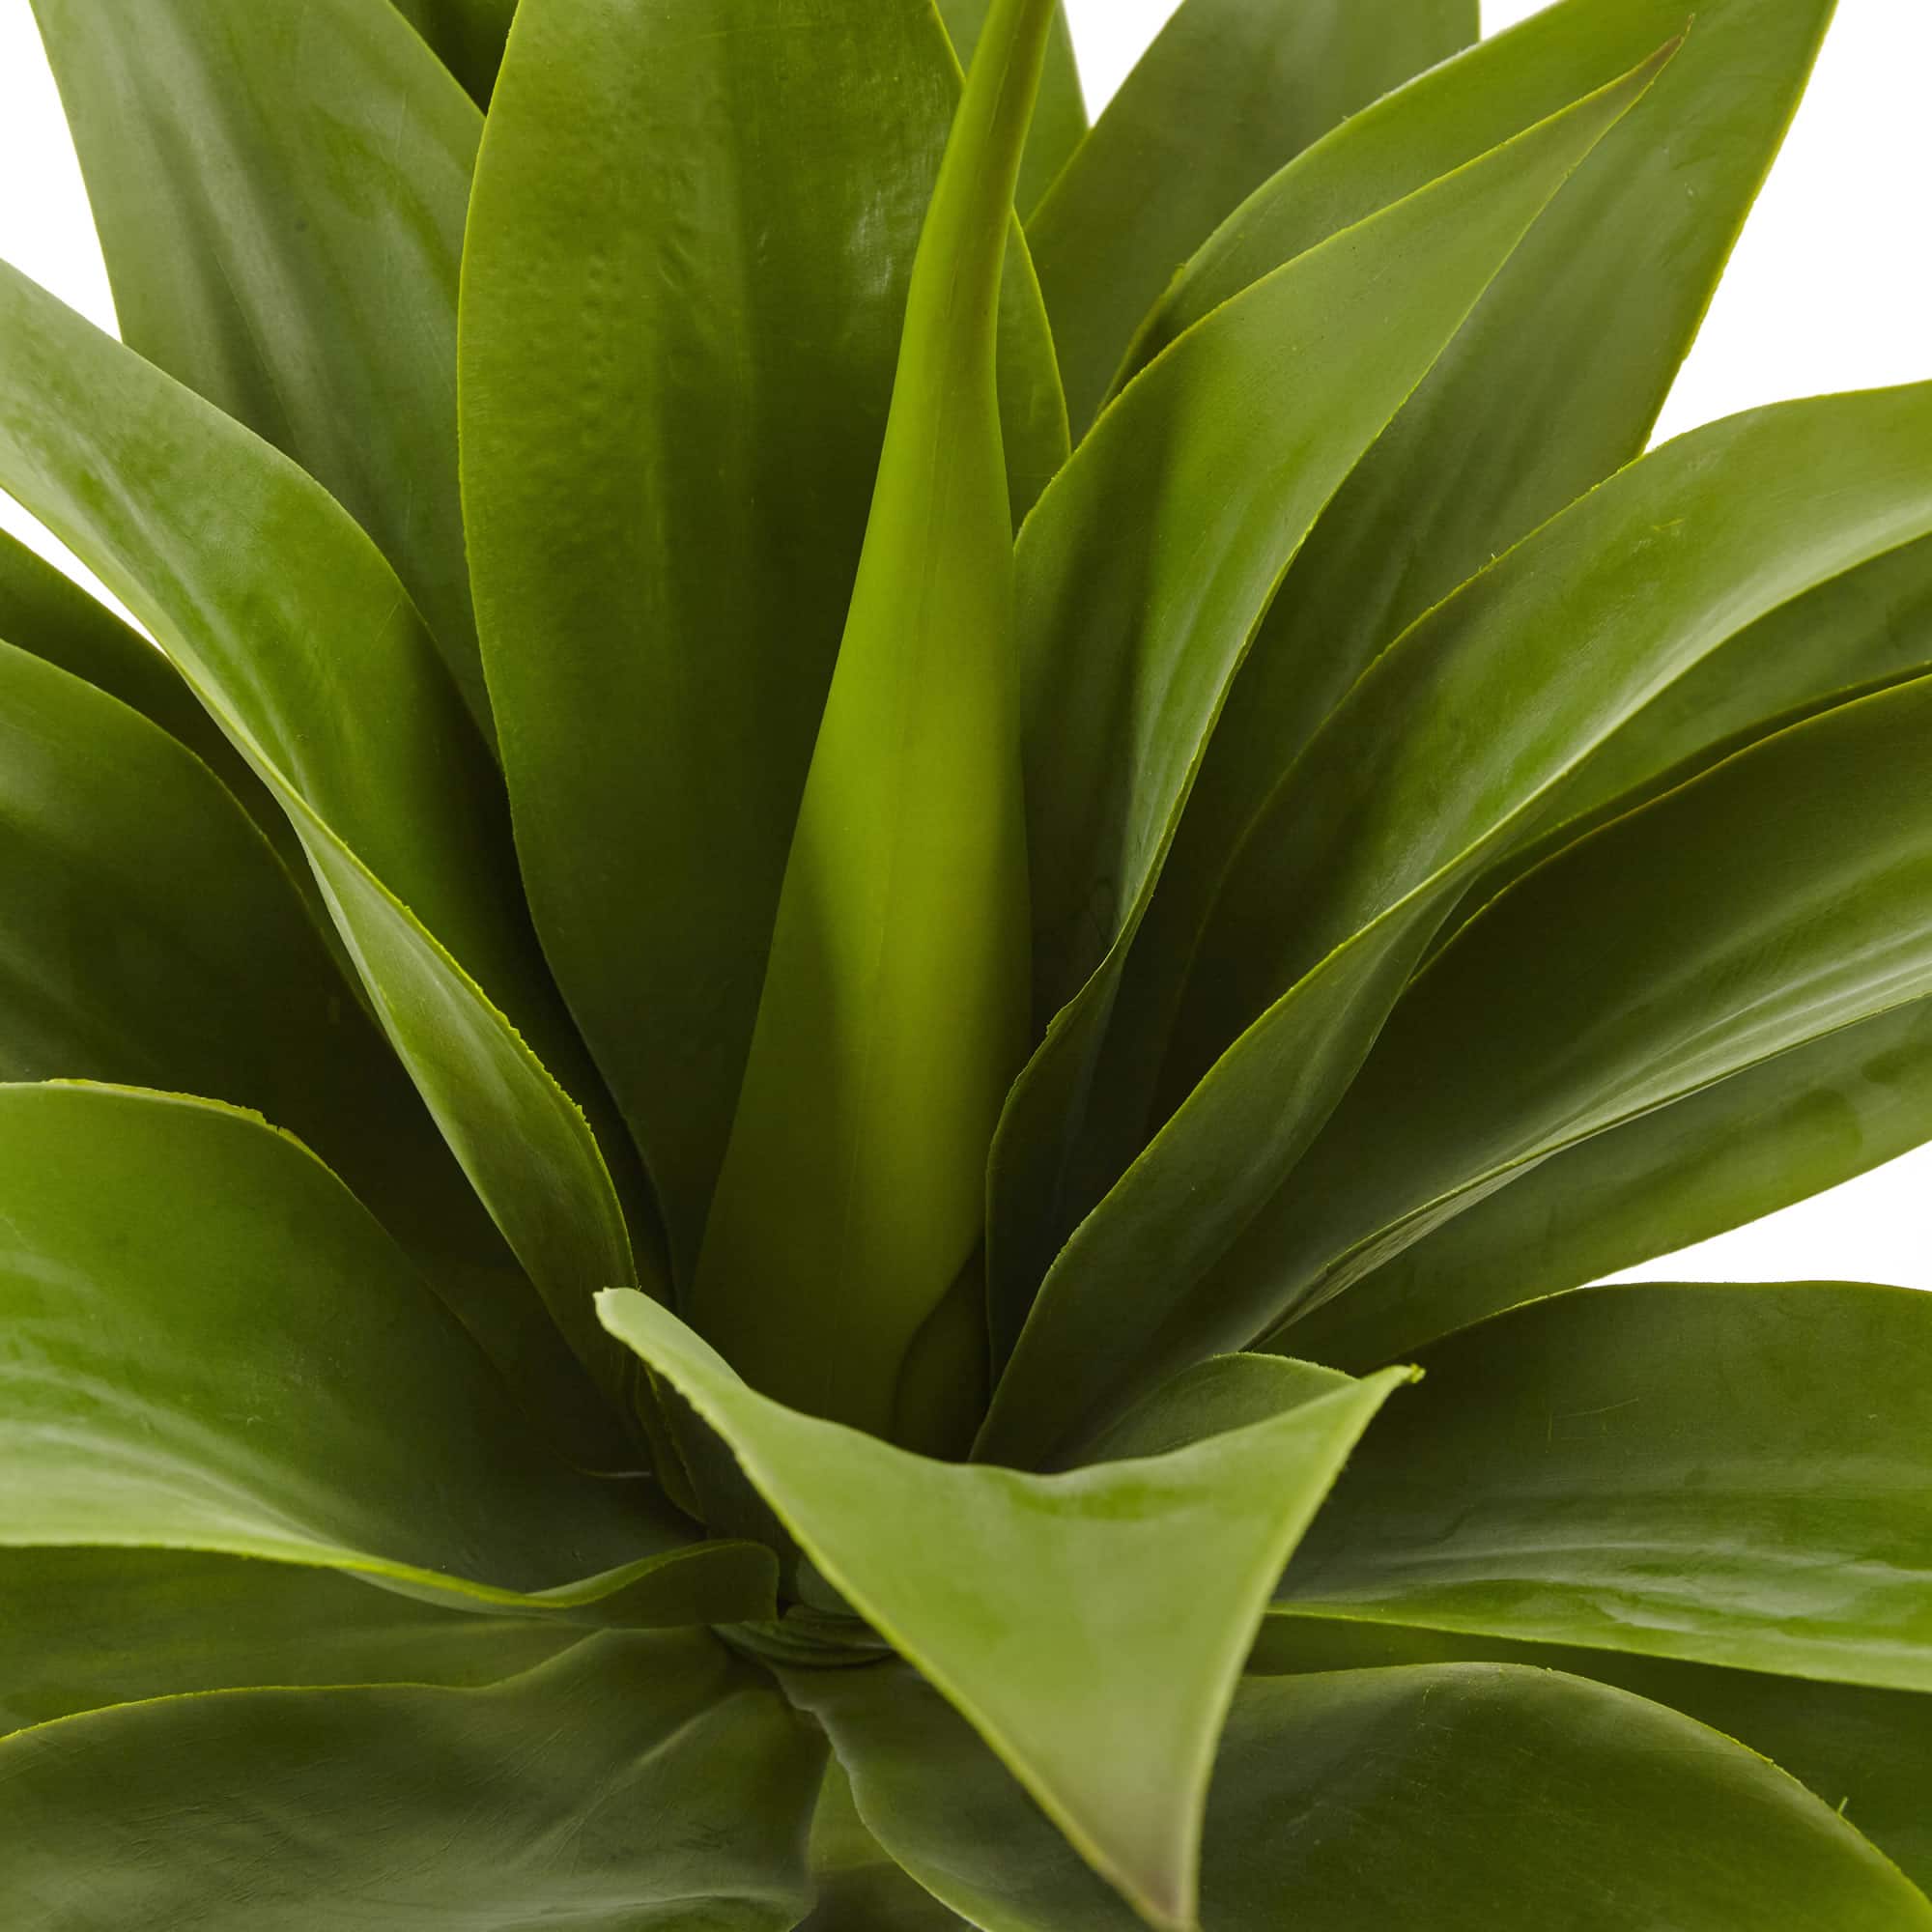 Green Large Agave Pick